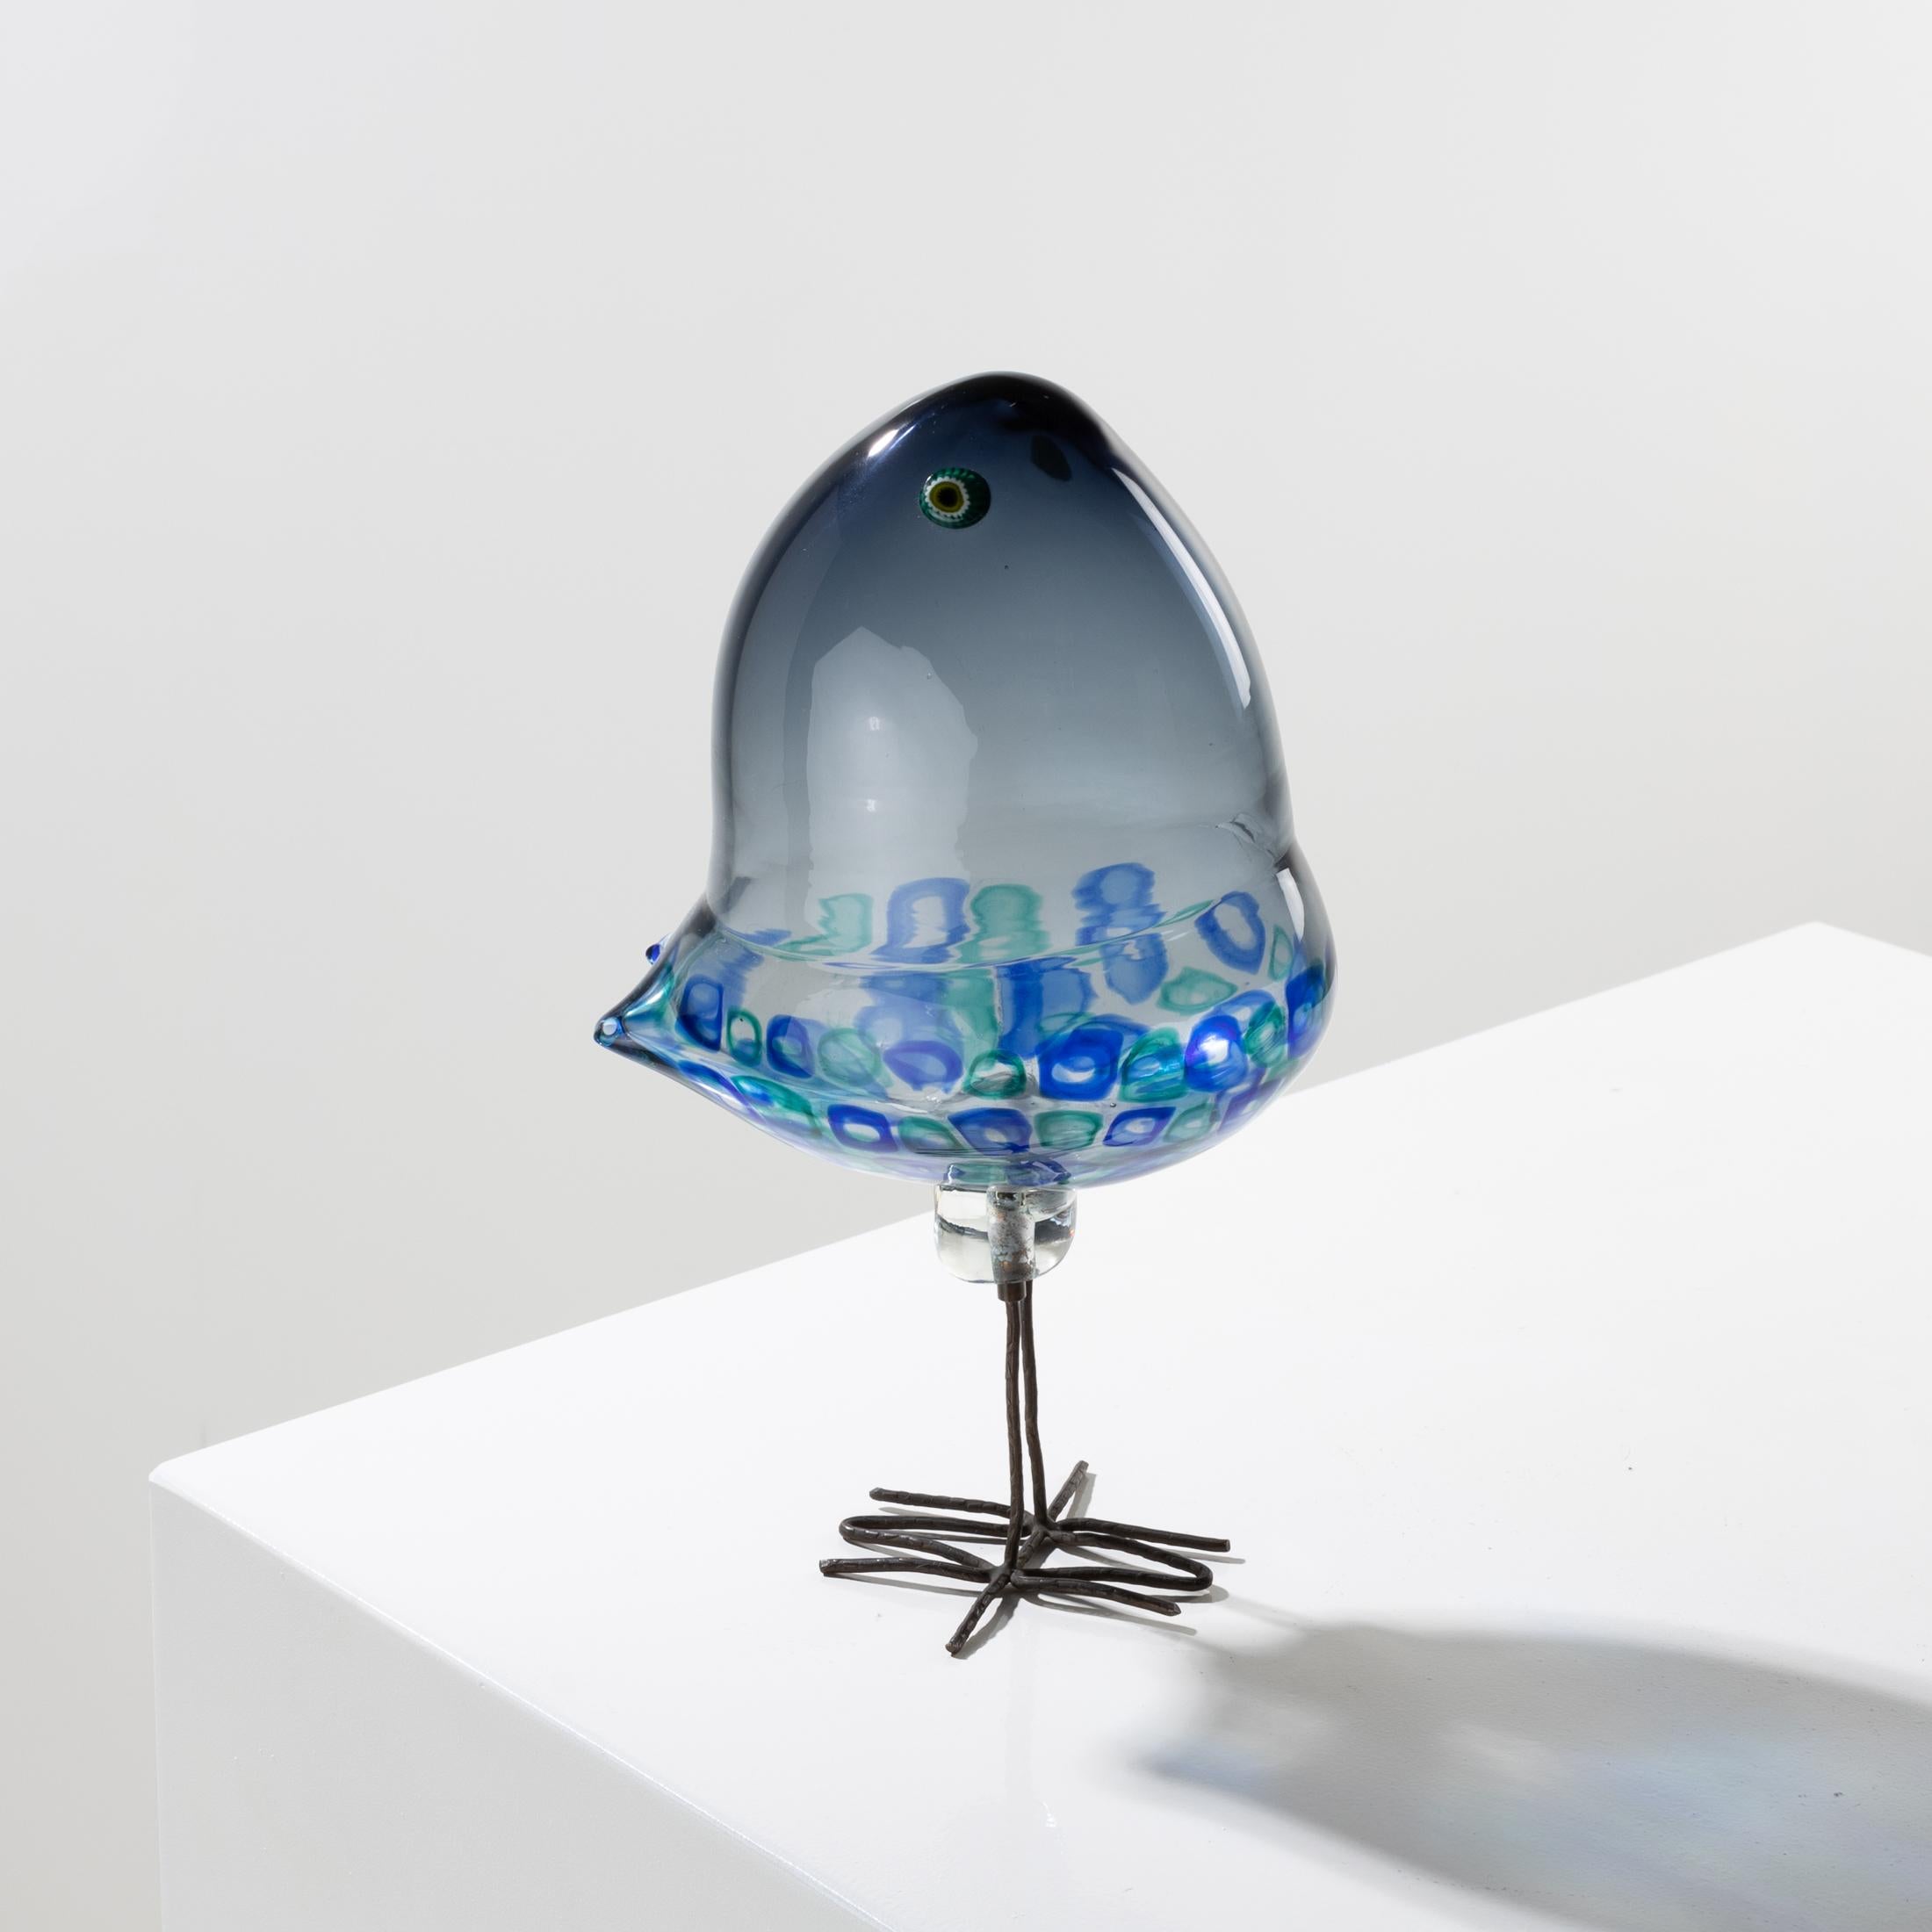 Glass bird resting on its hammered copper legs, designed by Alessandro Pianon for Vistosi in Murano, in 1962.
Its dark gray glass body, which can sometimes turn to a beautiful blue, is decorated with green and blue square murrines arranged